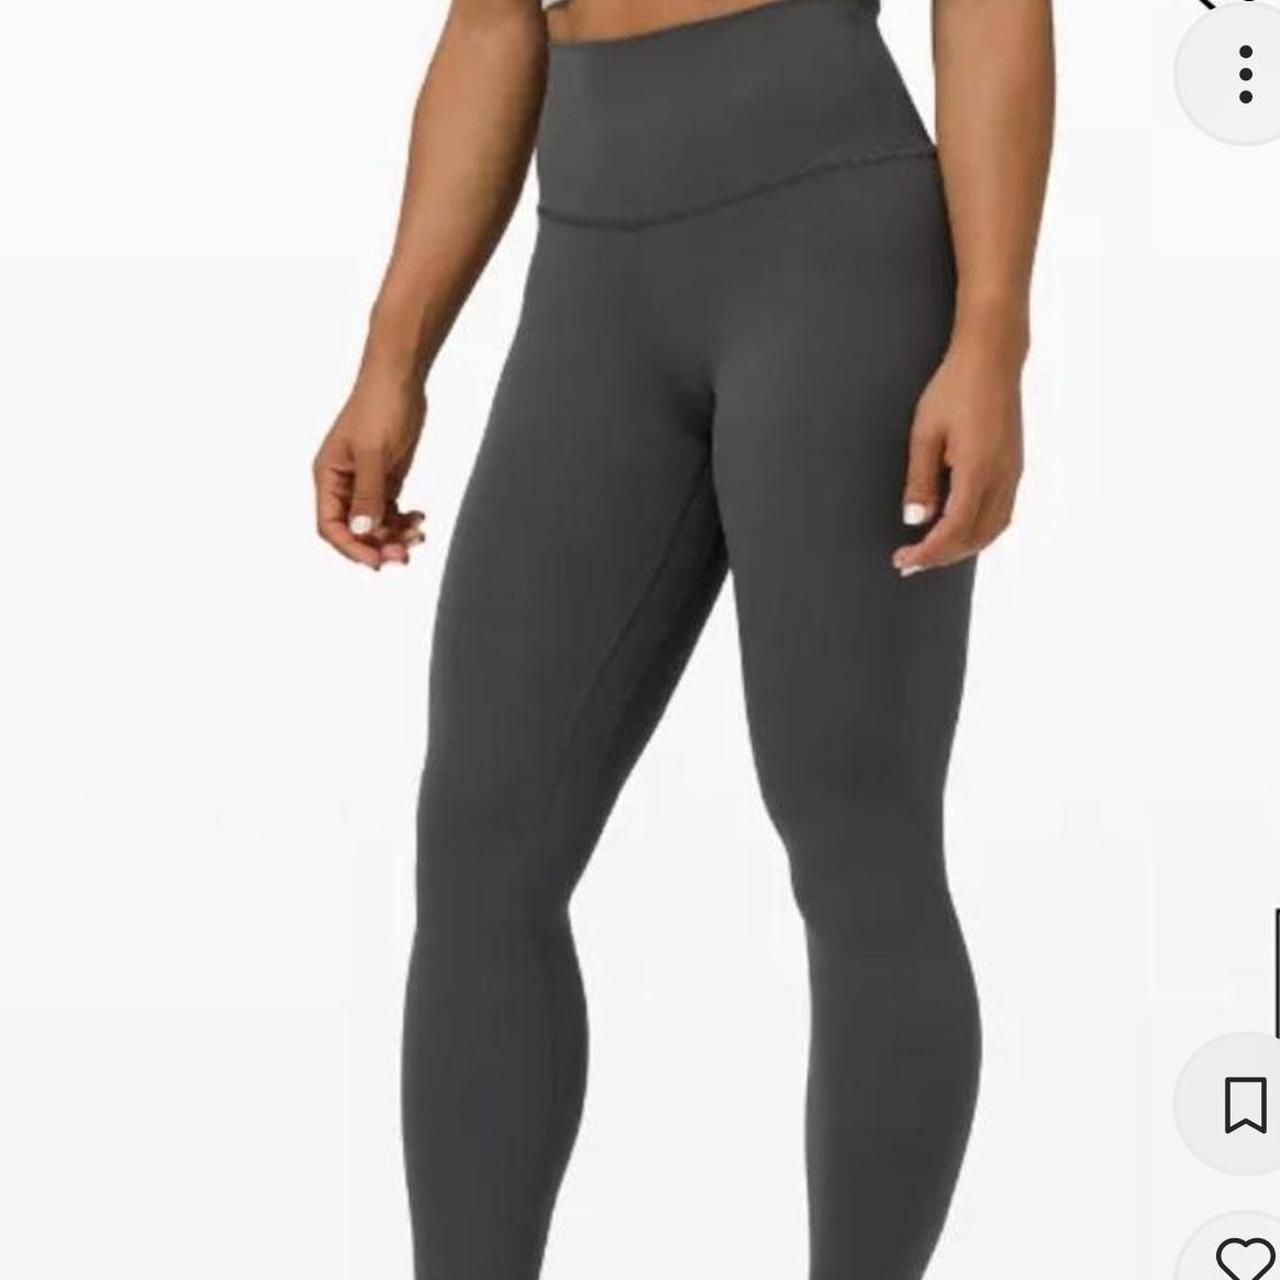 Lululemon Align High Rise in Graphite - bought wrong - Depop